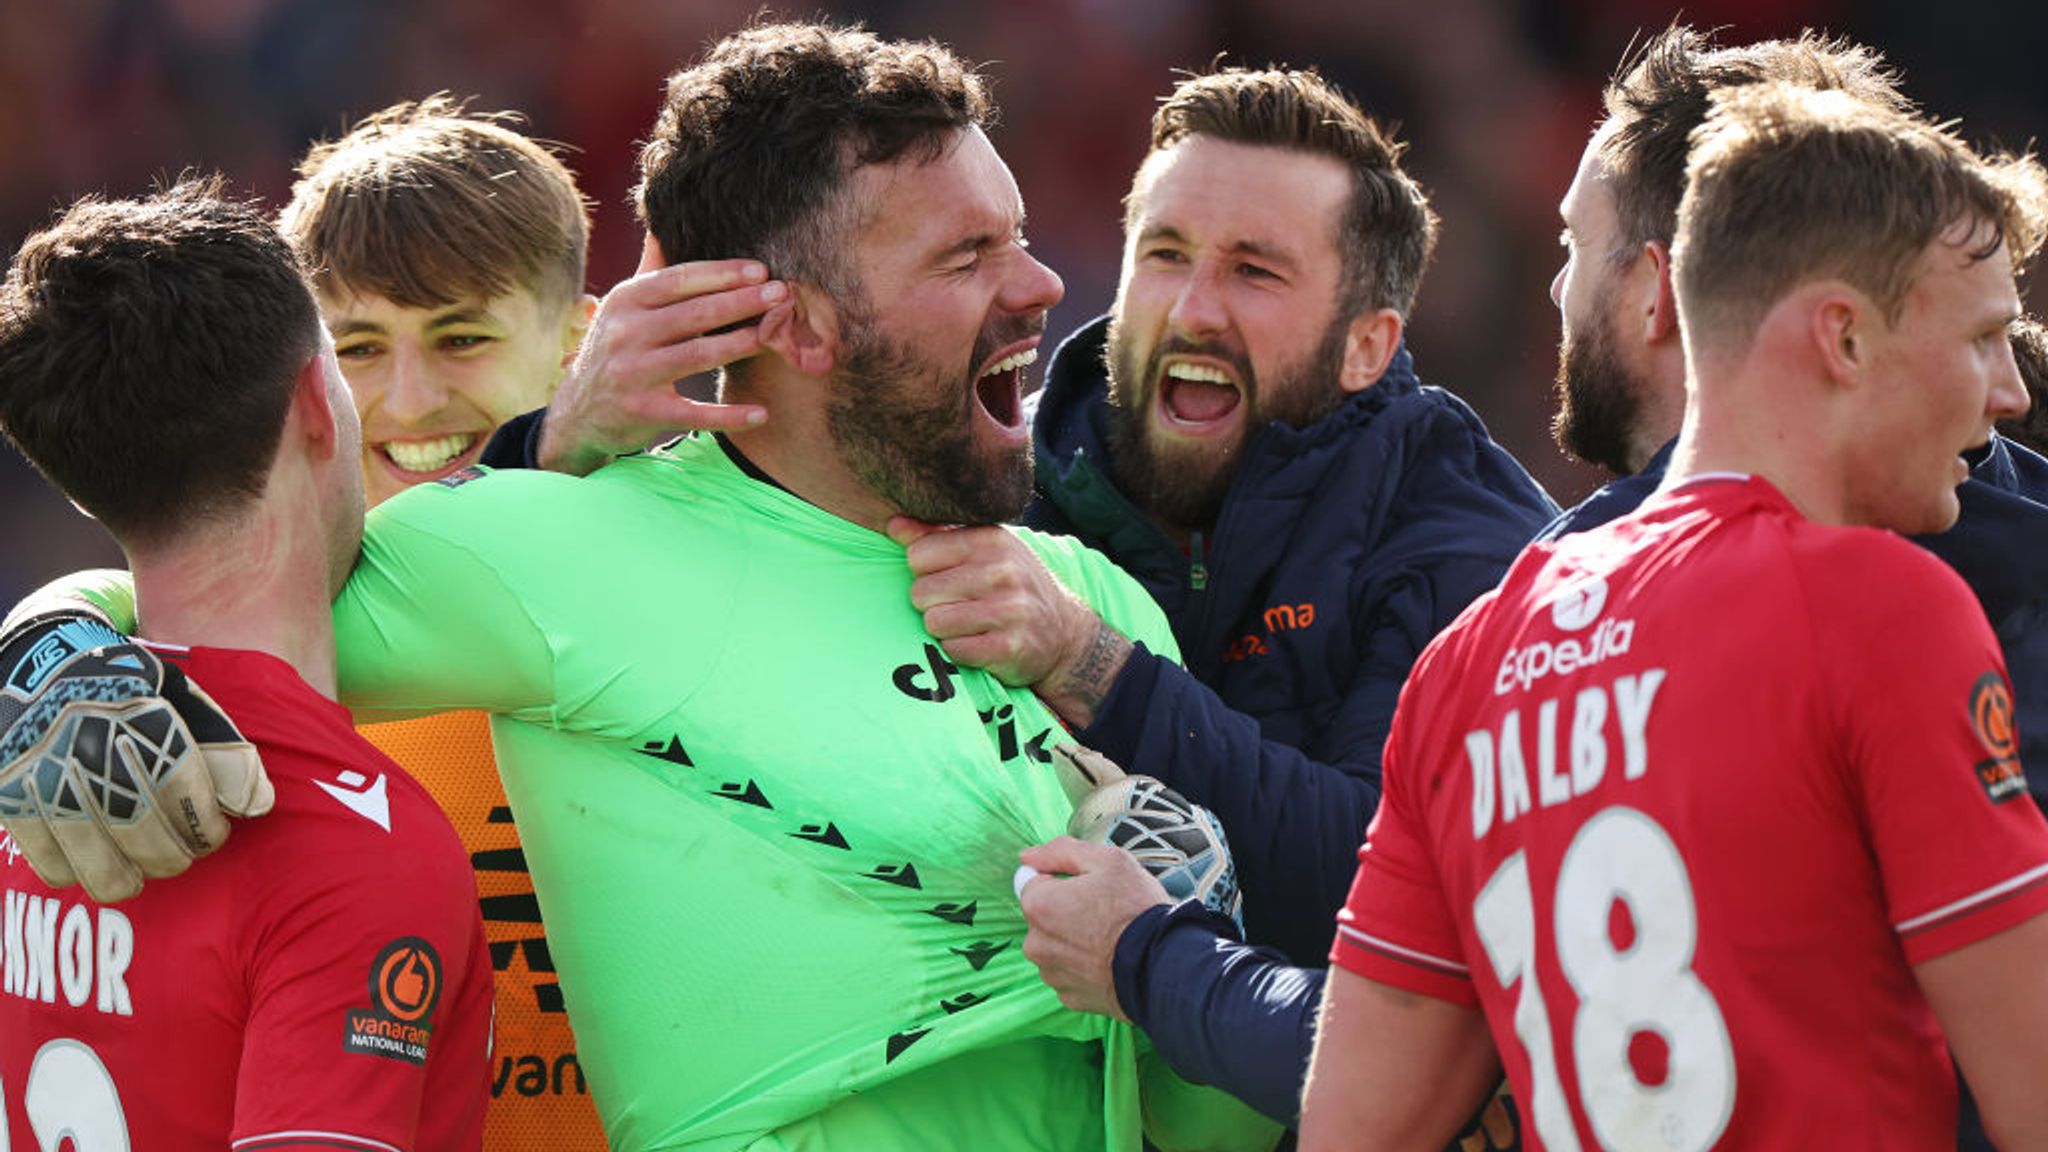 Wrexham 3-2 Notts County Ben Fosters last-gasp penalty save secures vital win in front of Ryan Reynolds and Rob McElhenney Football News Sky Sports